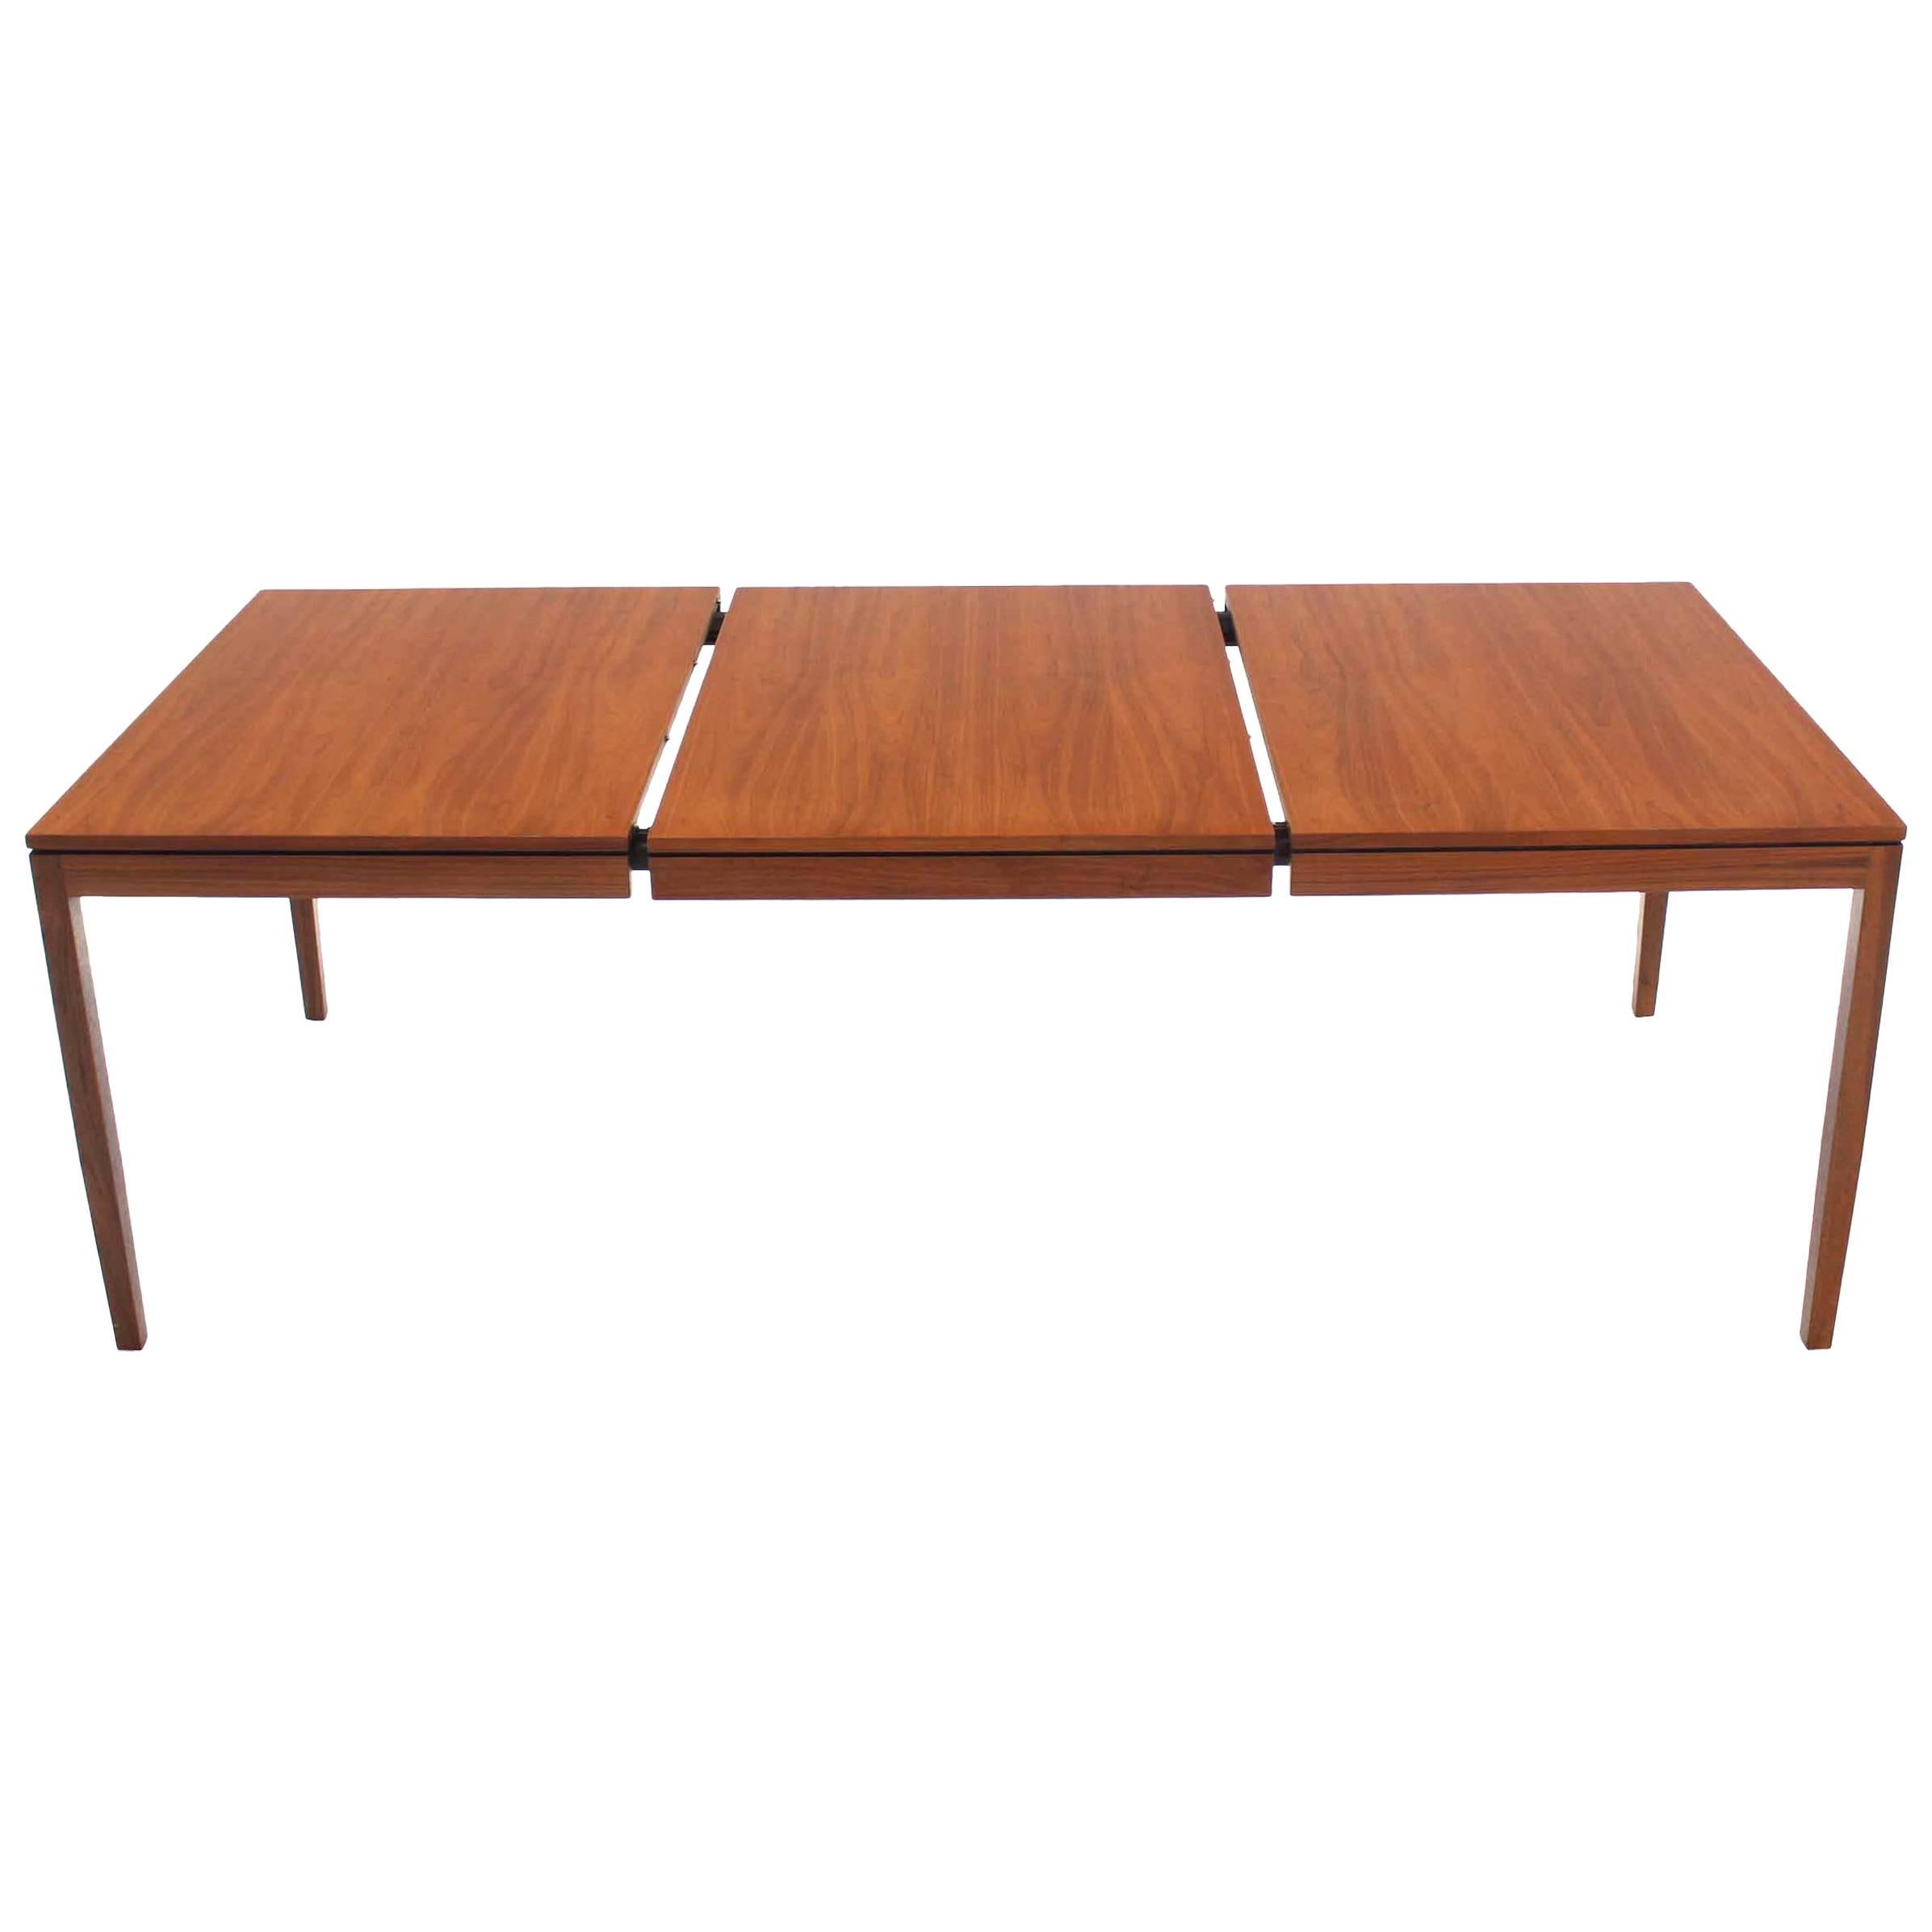 Outstanding Quality Walnut Dining Room Table by Knoll